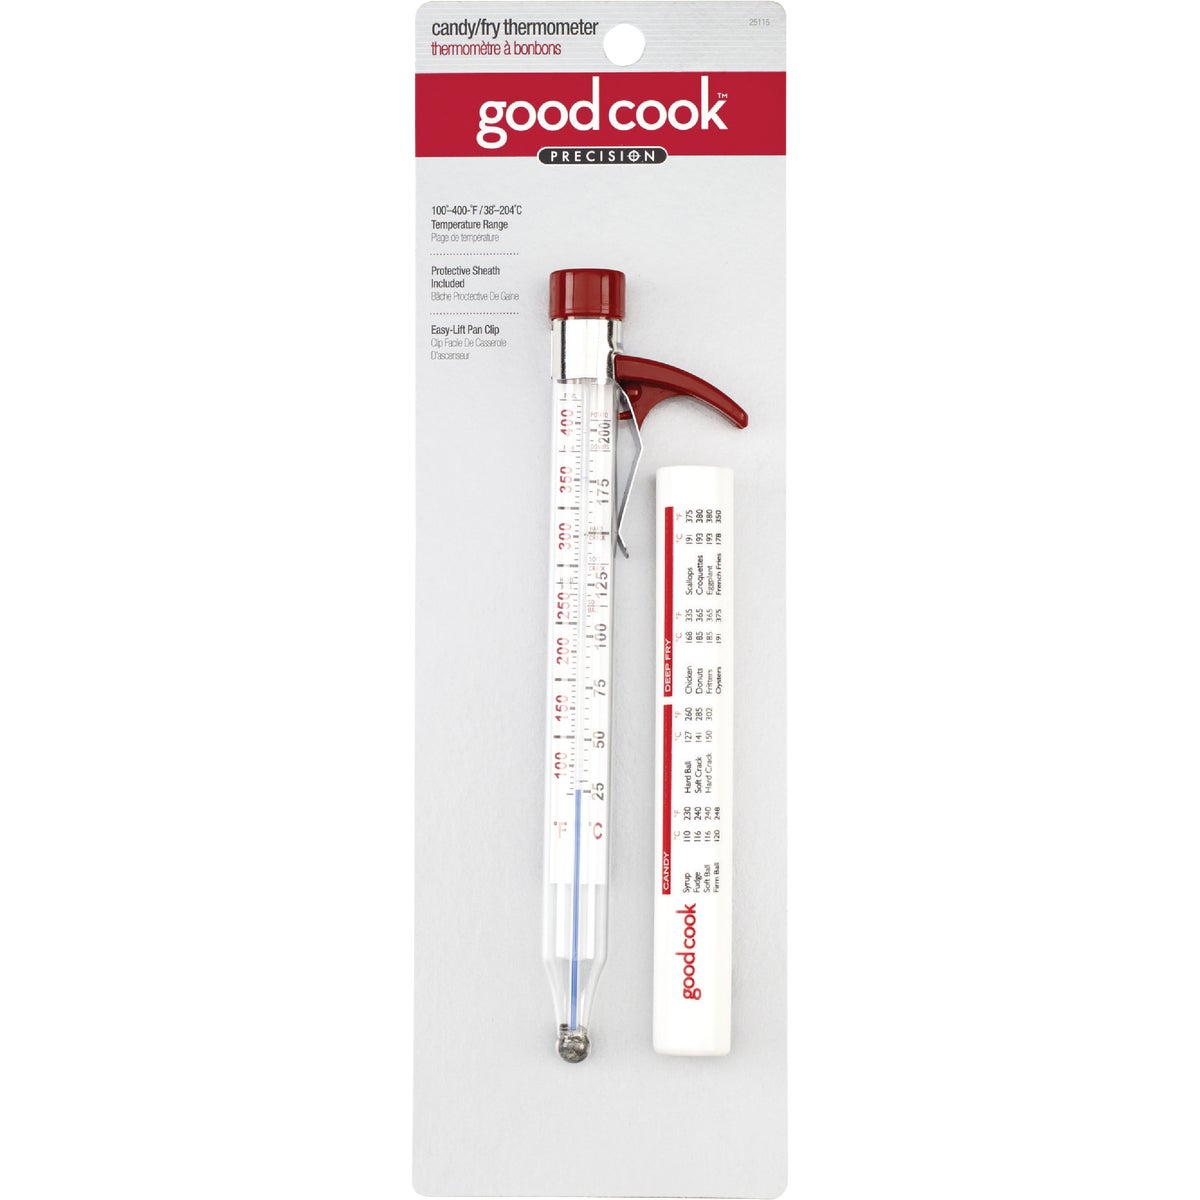 Item 644875, Candy/deep fry thermometer has an easy-lift pan clip and protective sheath